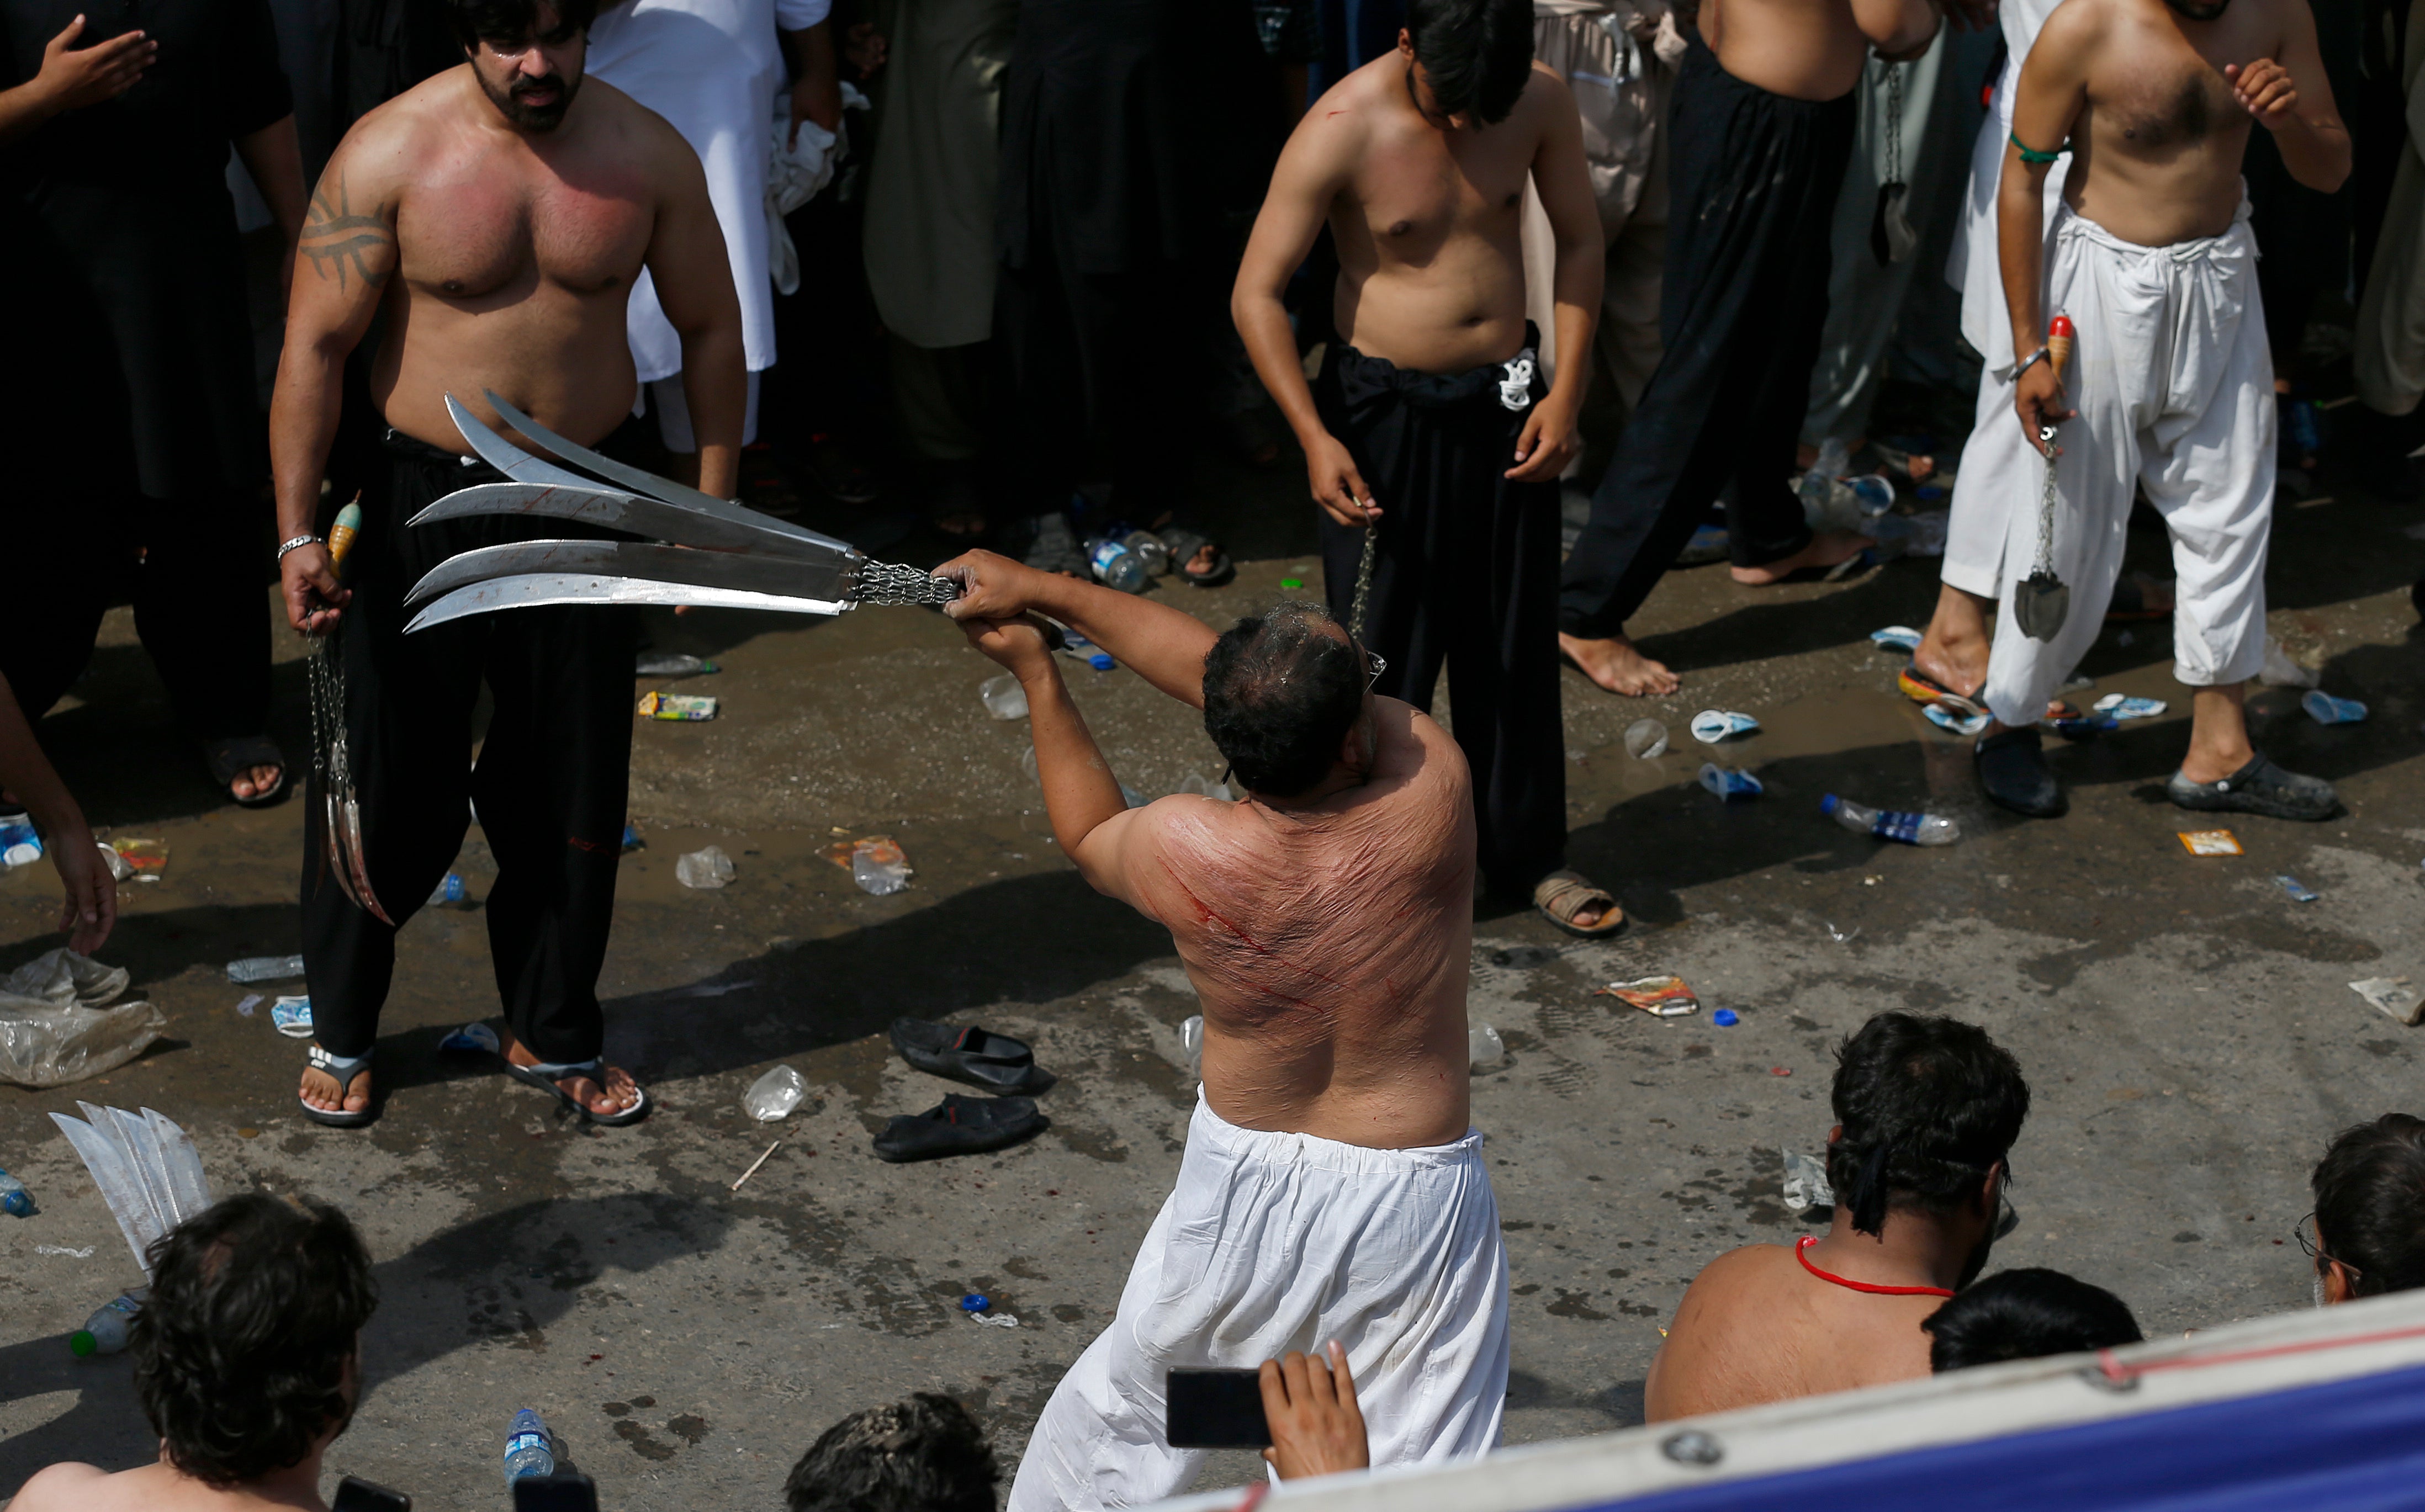 A Shia Muslim flagellates himself with swords on chains during a procession to mark Ashura in Rawalpindi, Pakistan on 19 August 2021